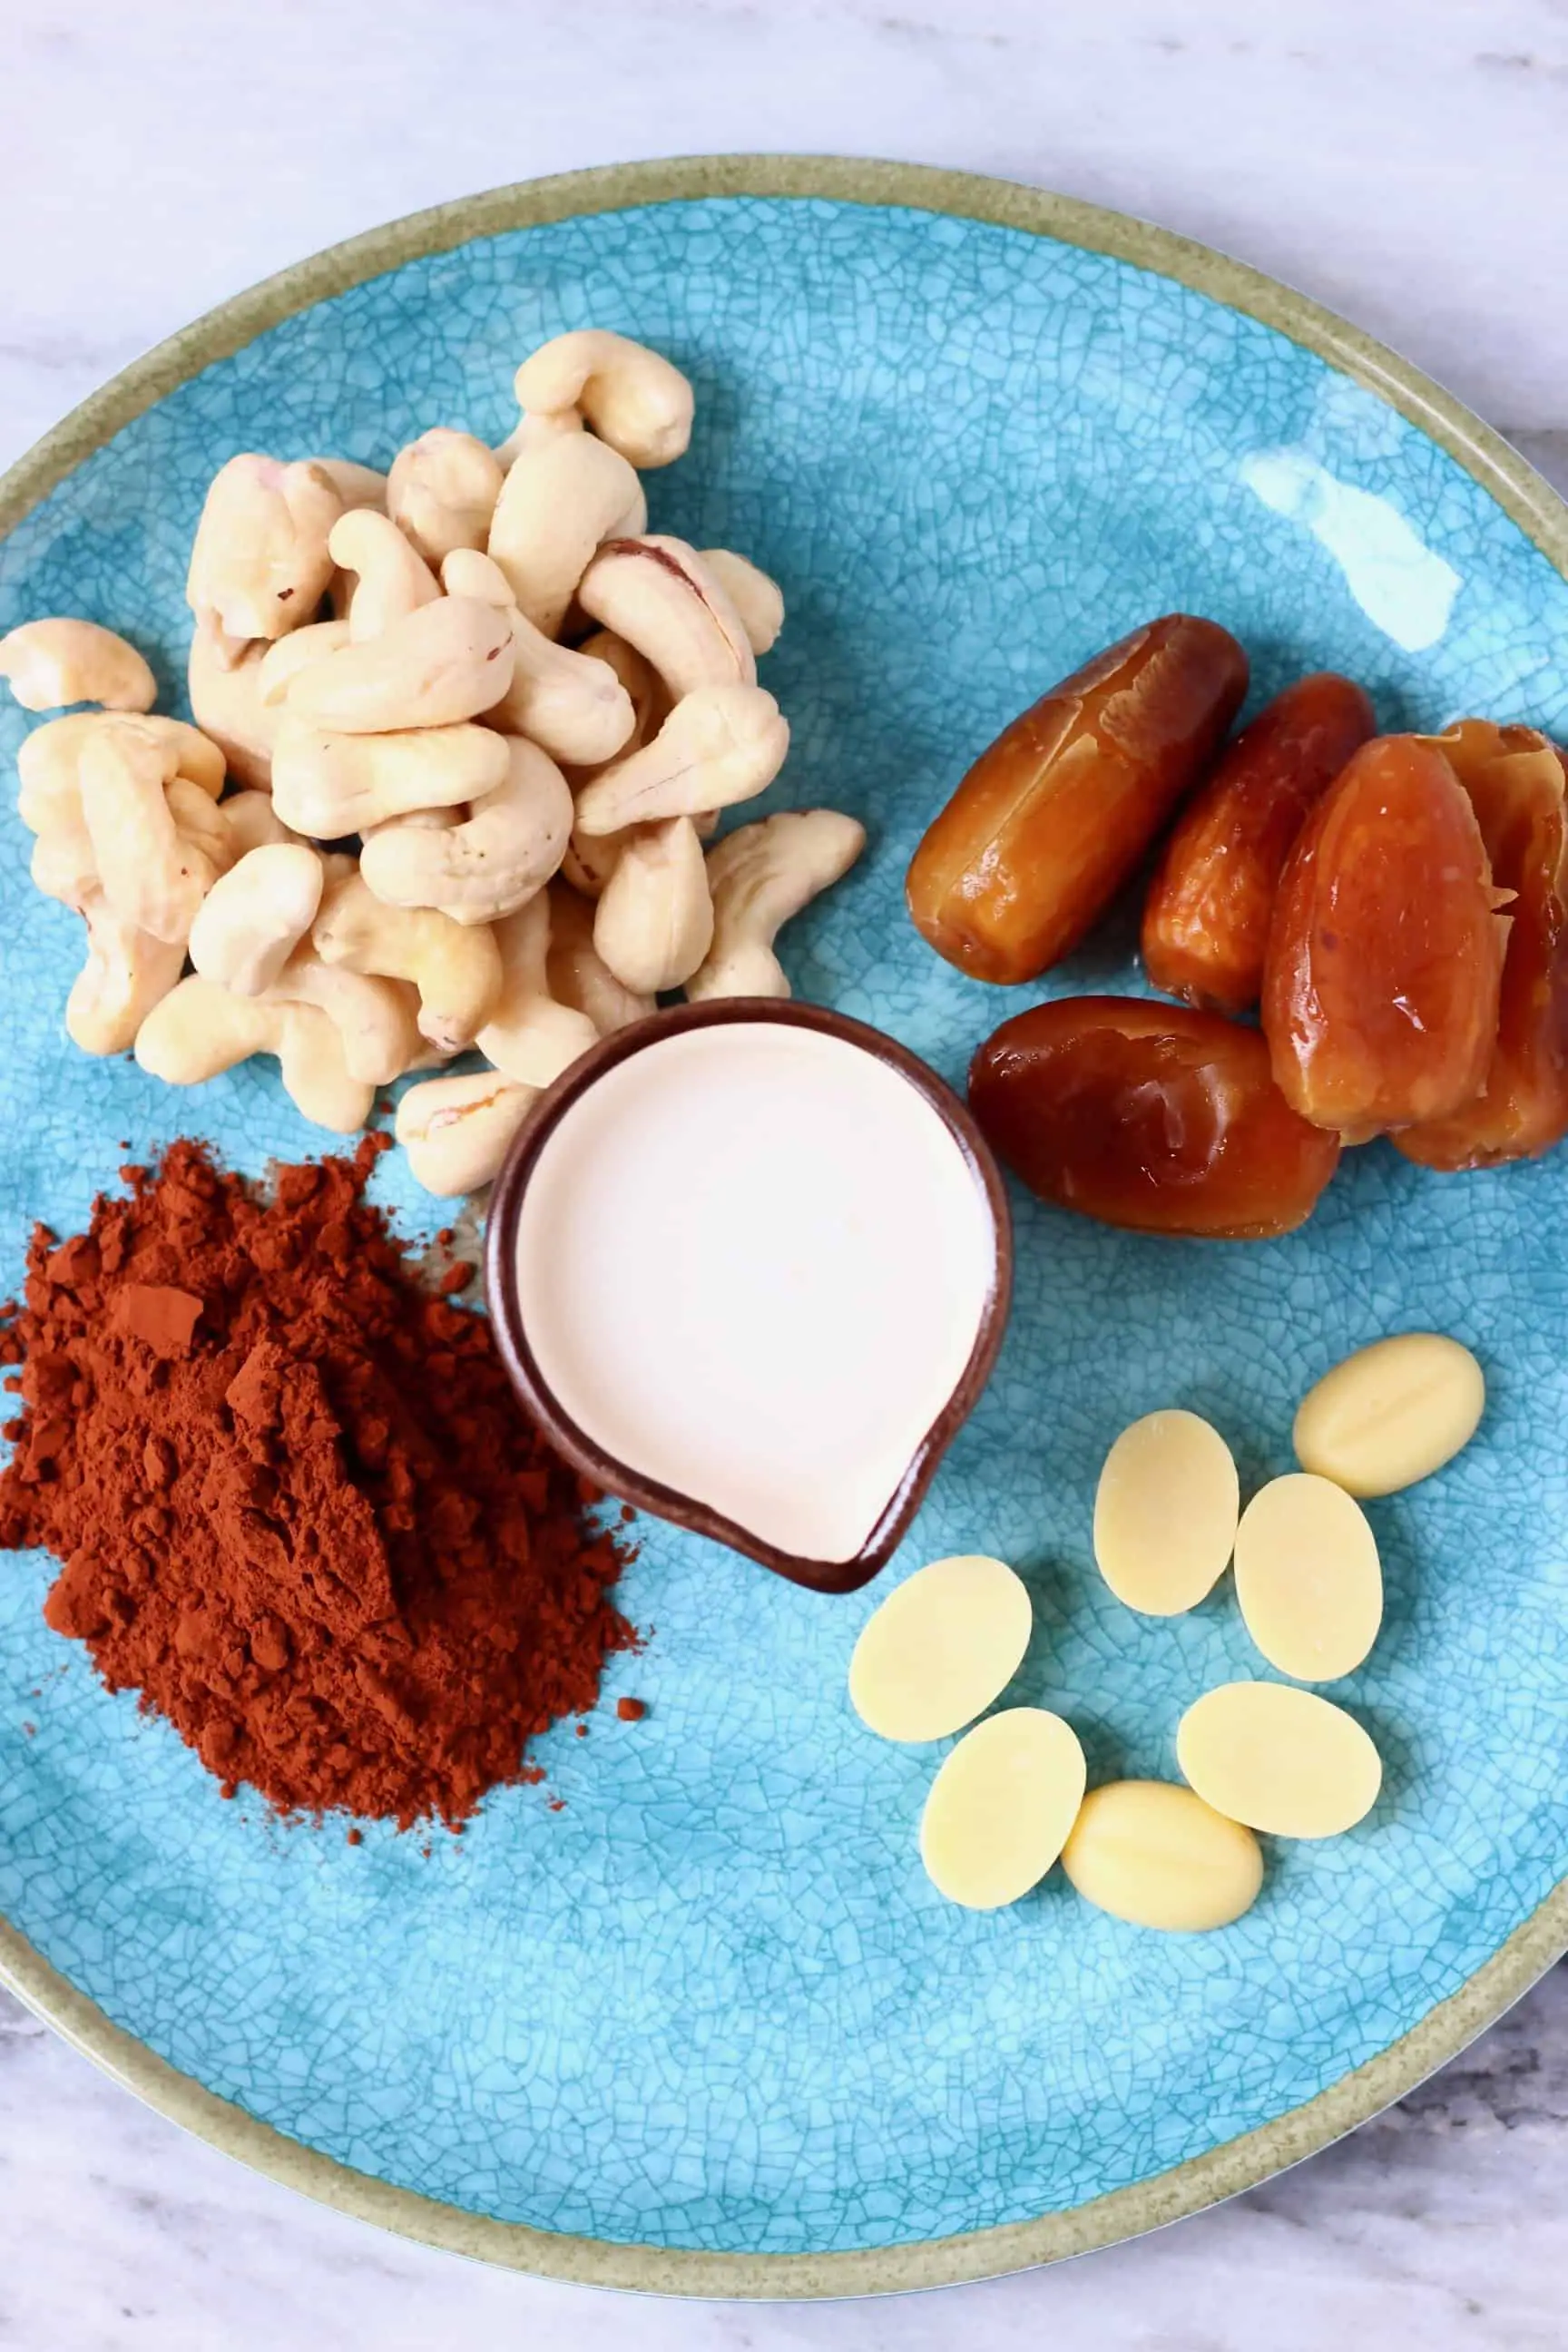 Cashew nuts, dates, cocoa powder, cacao butter and a small jug of milk on a plate